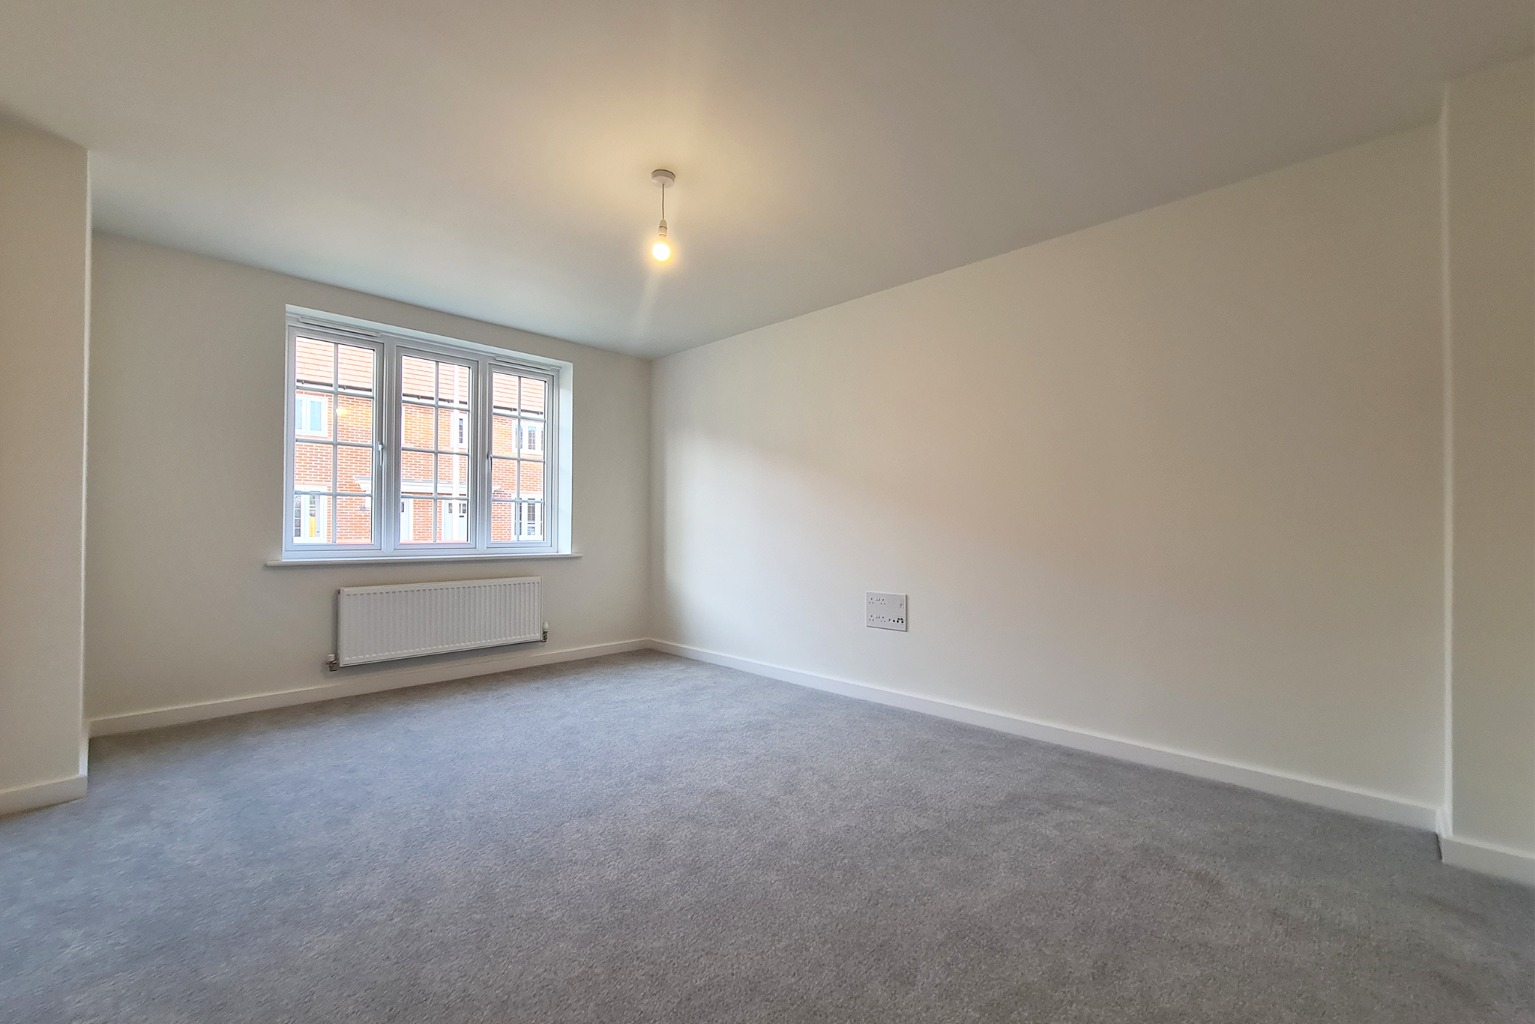 3 bed detached house to rent in Bland Way, Reading  - Property Image 3